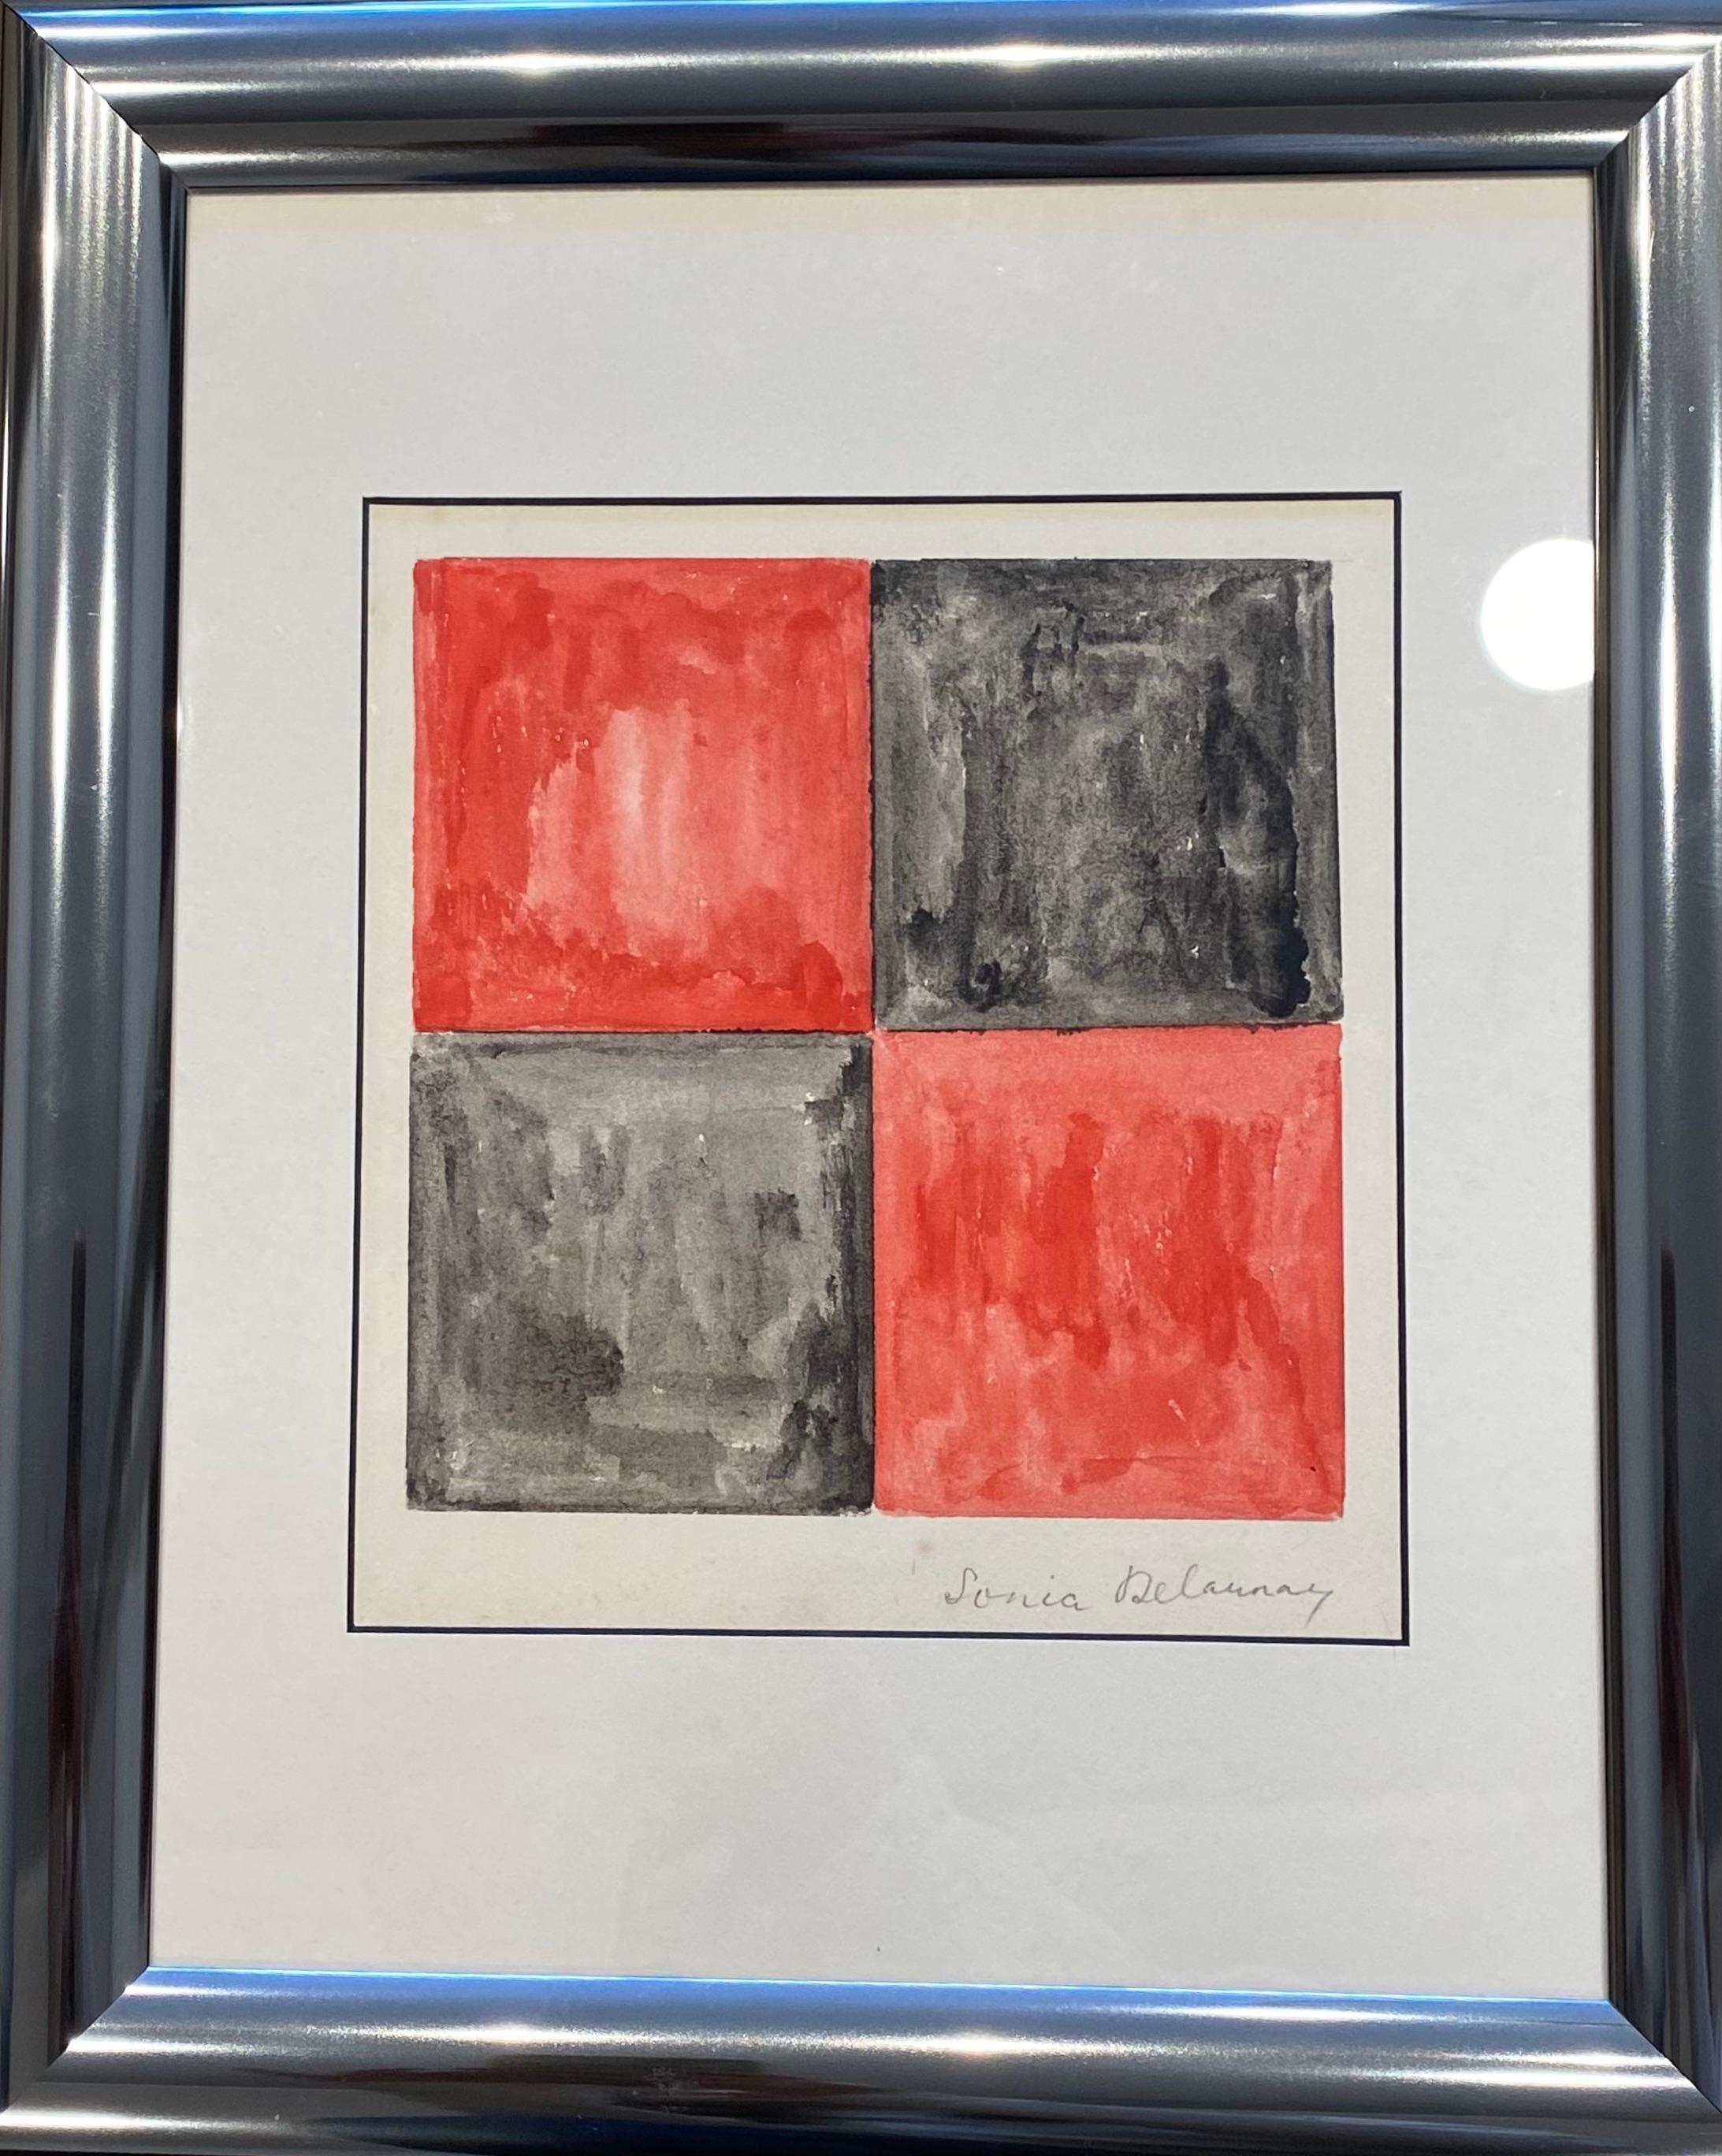 Rare painting by Sonia Delaunay 
Gouache on paper 
Measures: With frame: 35 cm x 29 cm x 3 cm
Without 17 cm x 17 cm
Excellent condition 
1971
Sold with certificate of authenticity 
Work signed in pencil lower right by the artist 
Price :